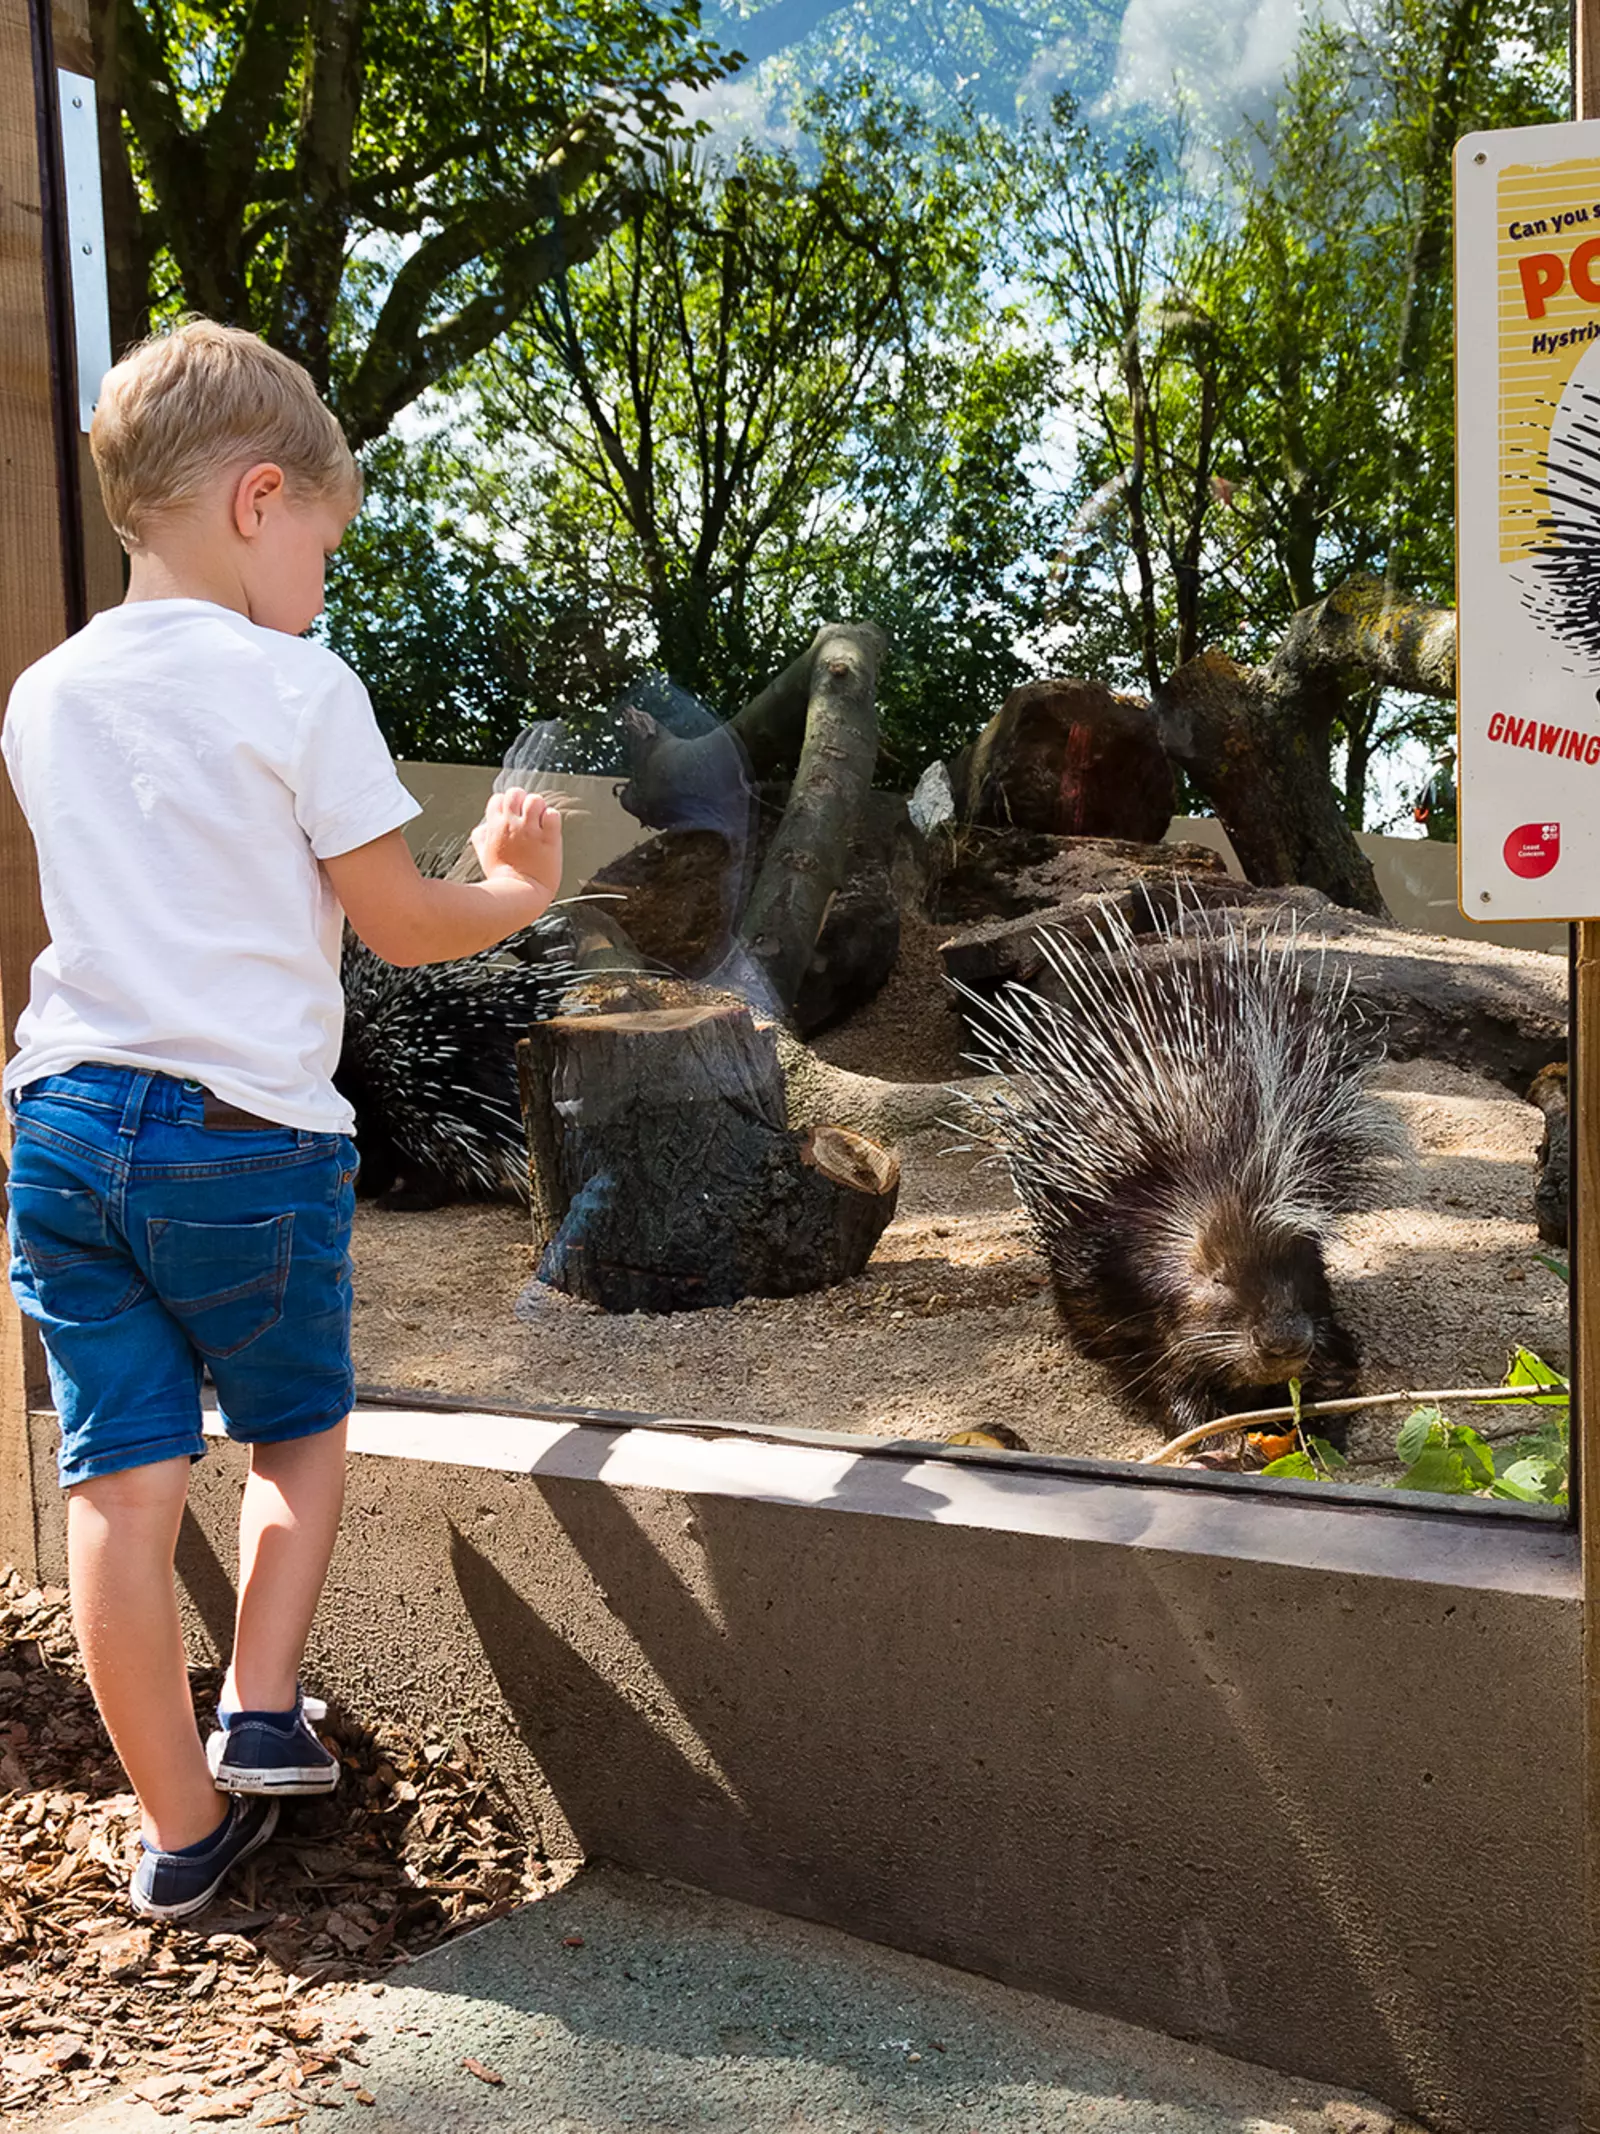 Two children look into the porcupine enclosure at Animal Adventure